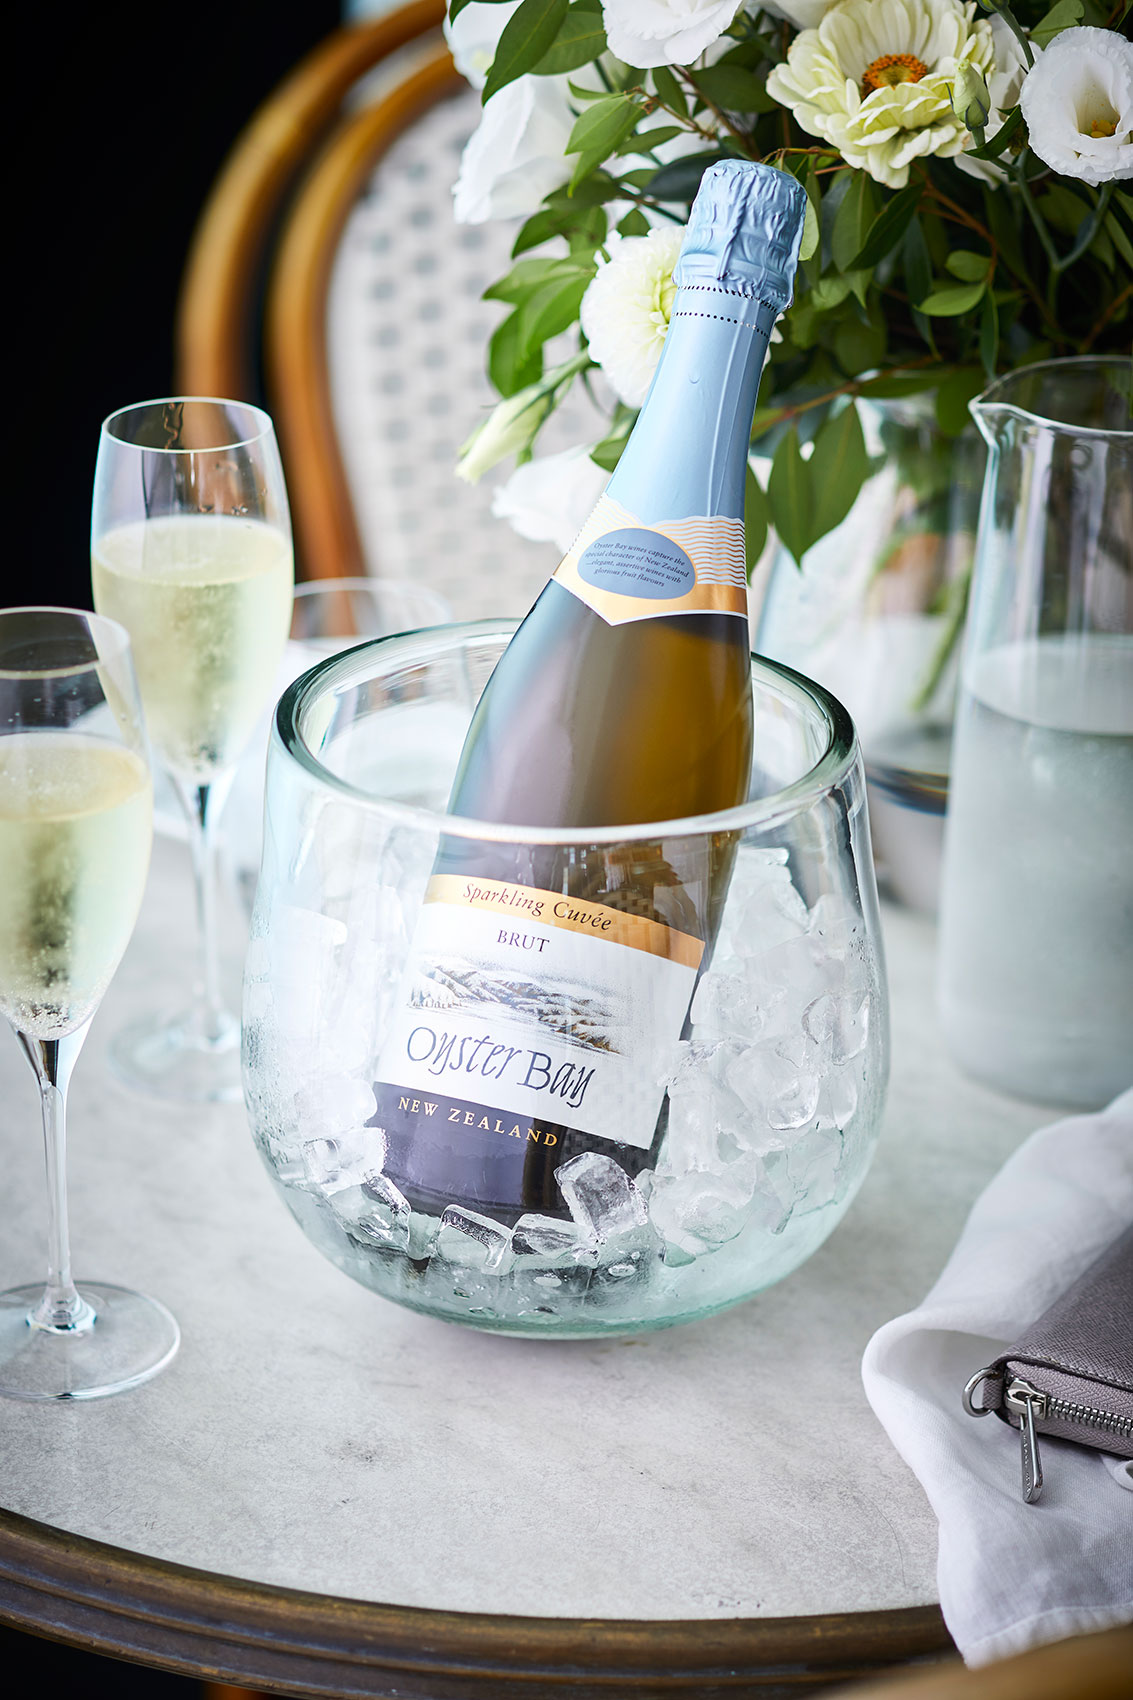 Oyster Bay Sparkling Cuvée New Zealand Wine • Beverage & Liquid Photography